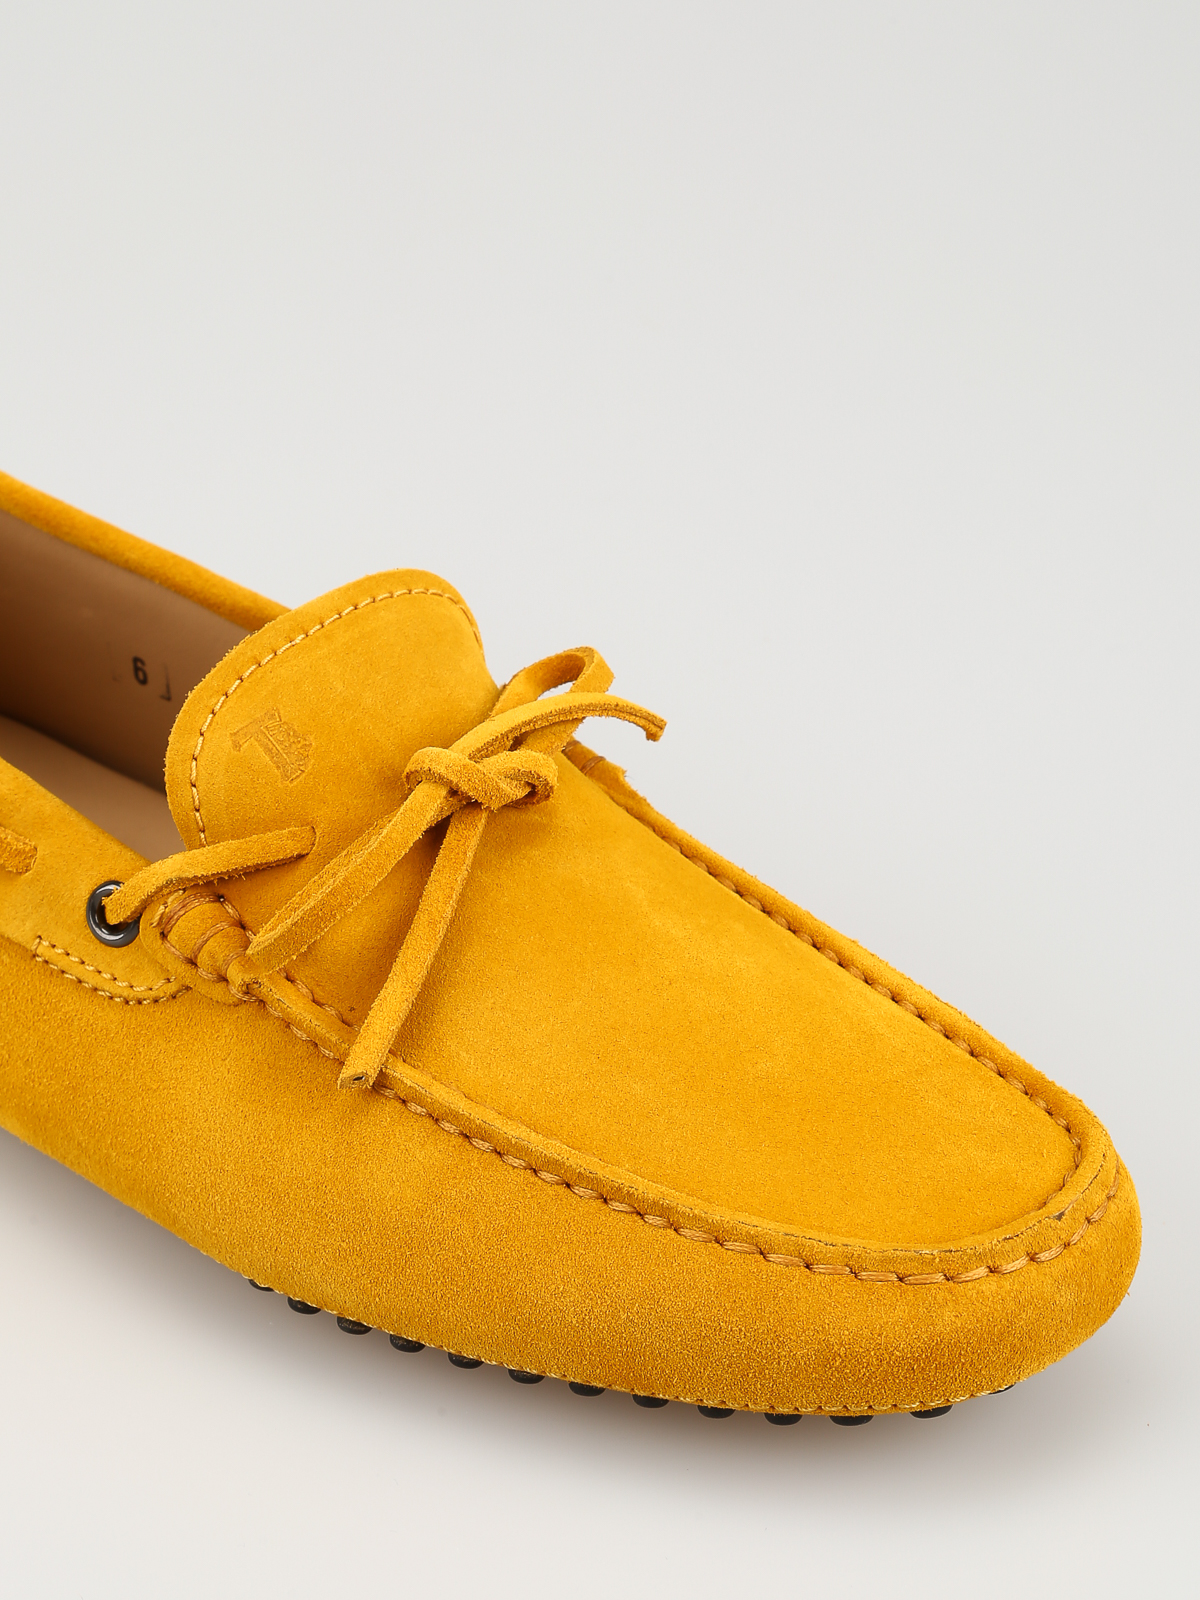 tod's yellow loafers